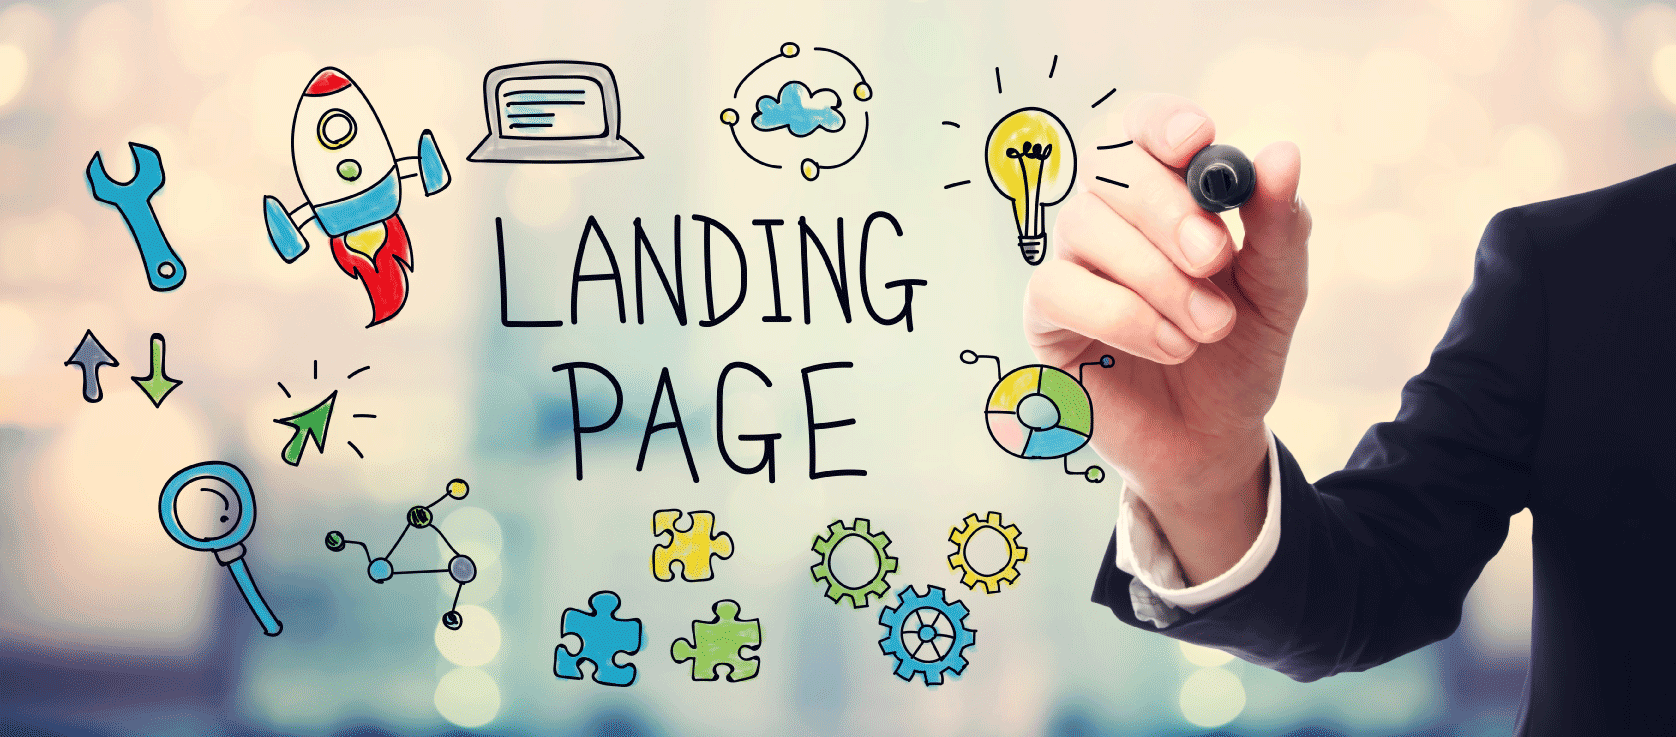 A landing page can function as a very effective MVP